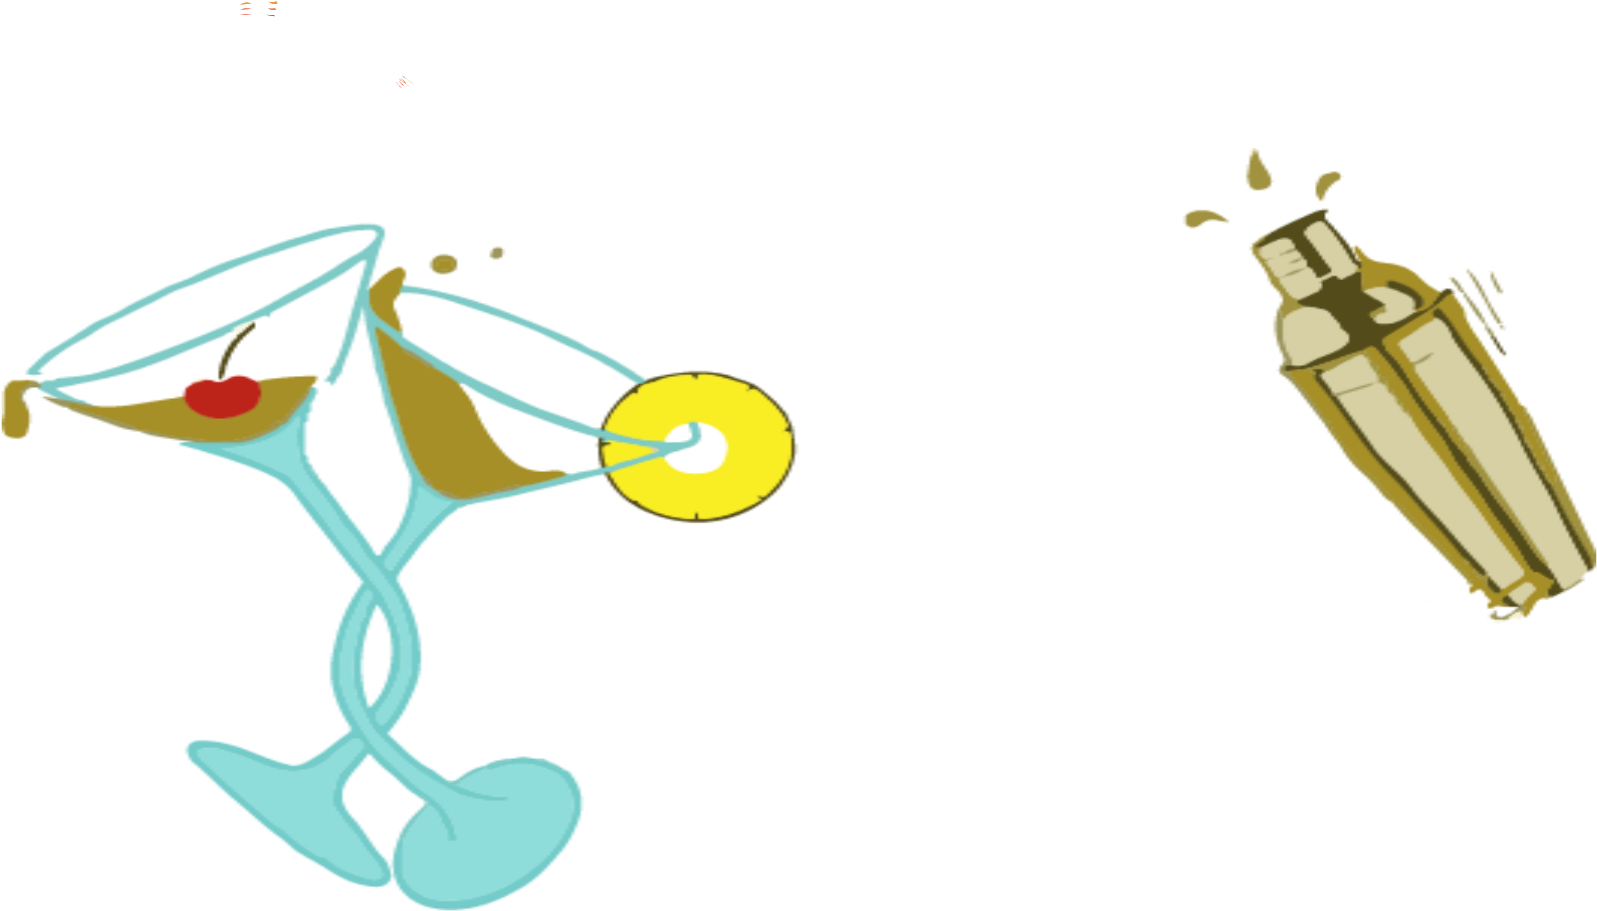 New Orleans Finest Bartending Logo - Just The Right Attitude (1801x1200)